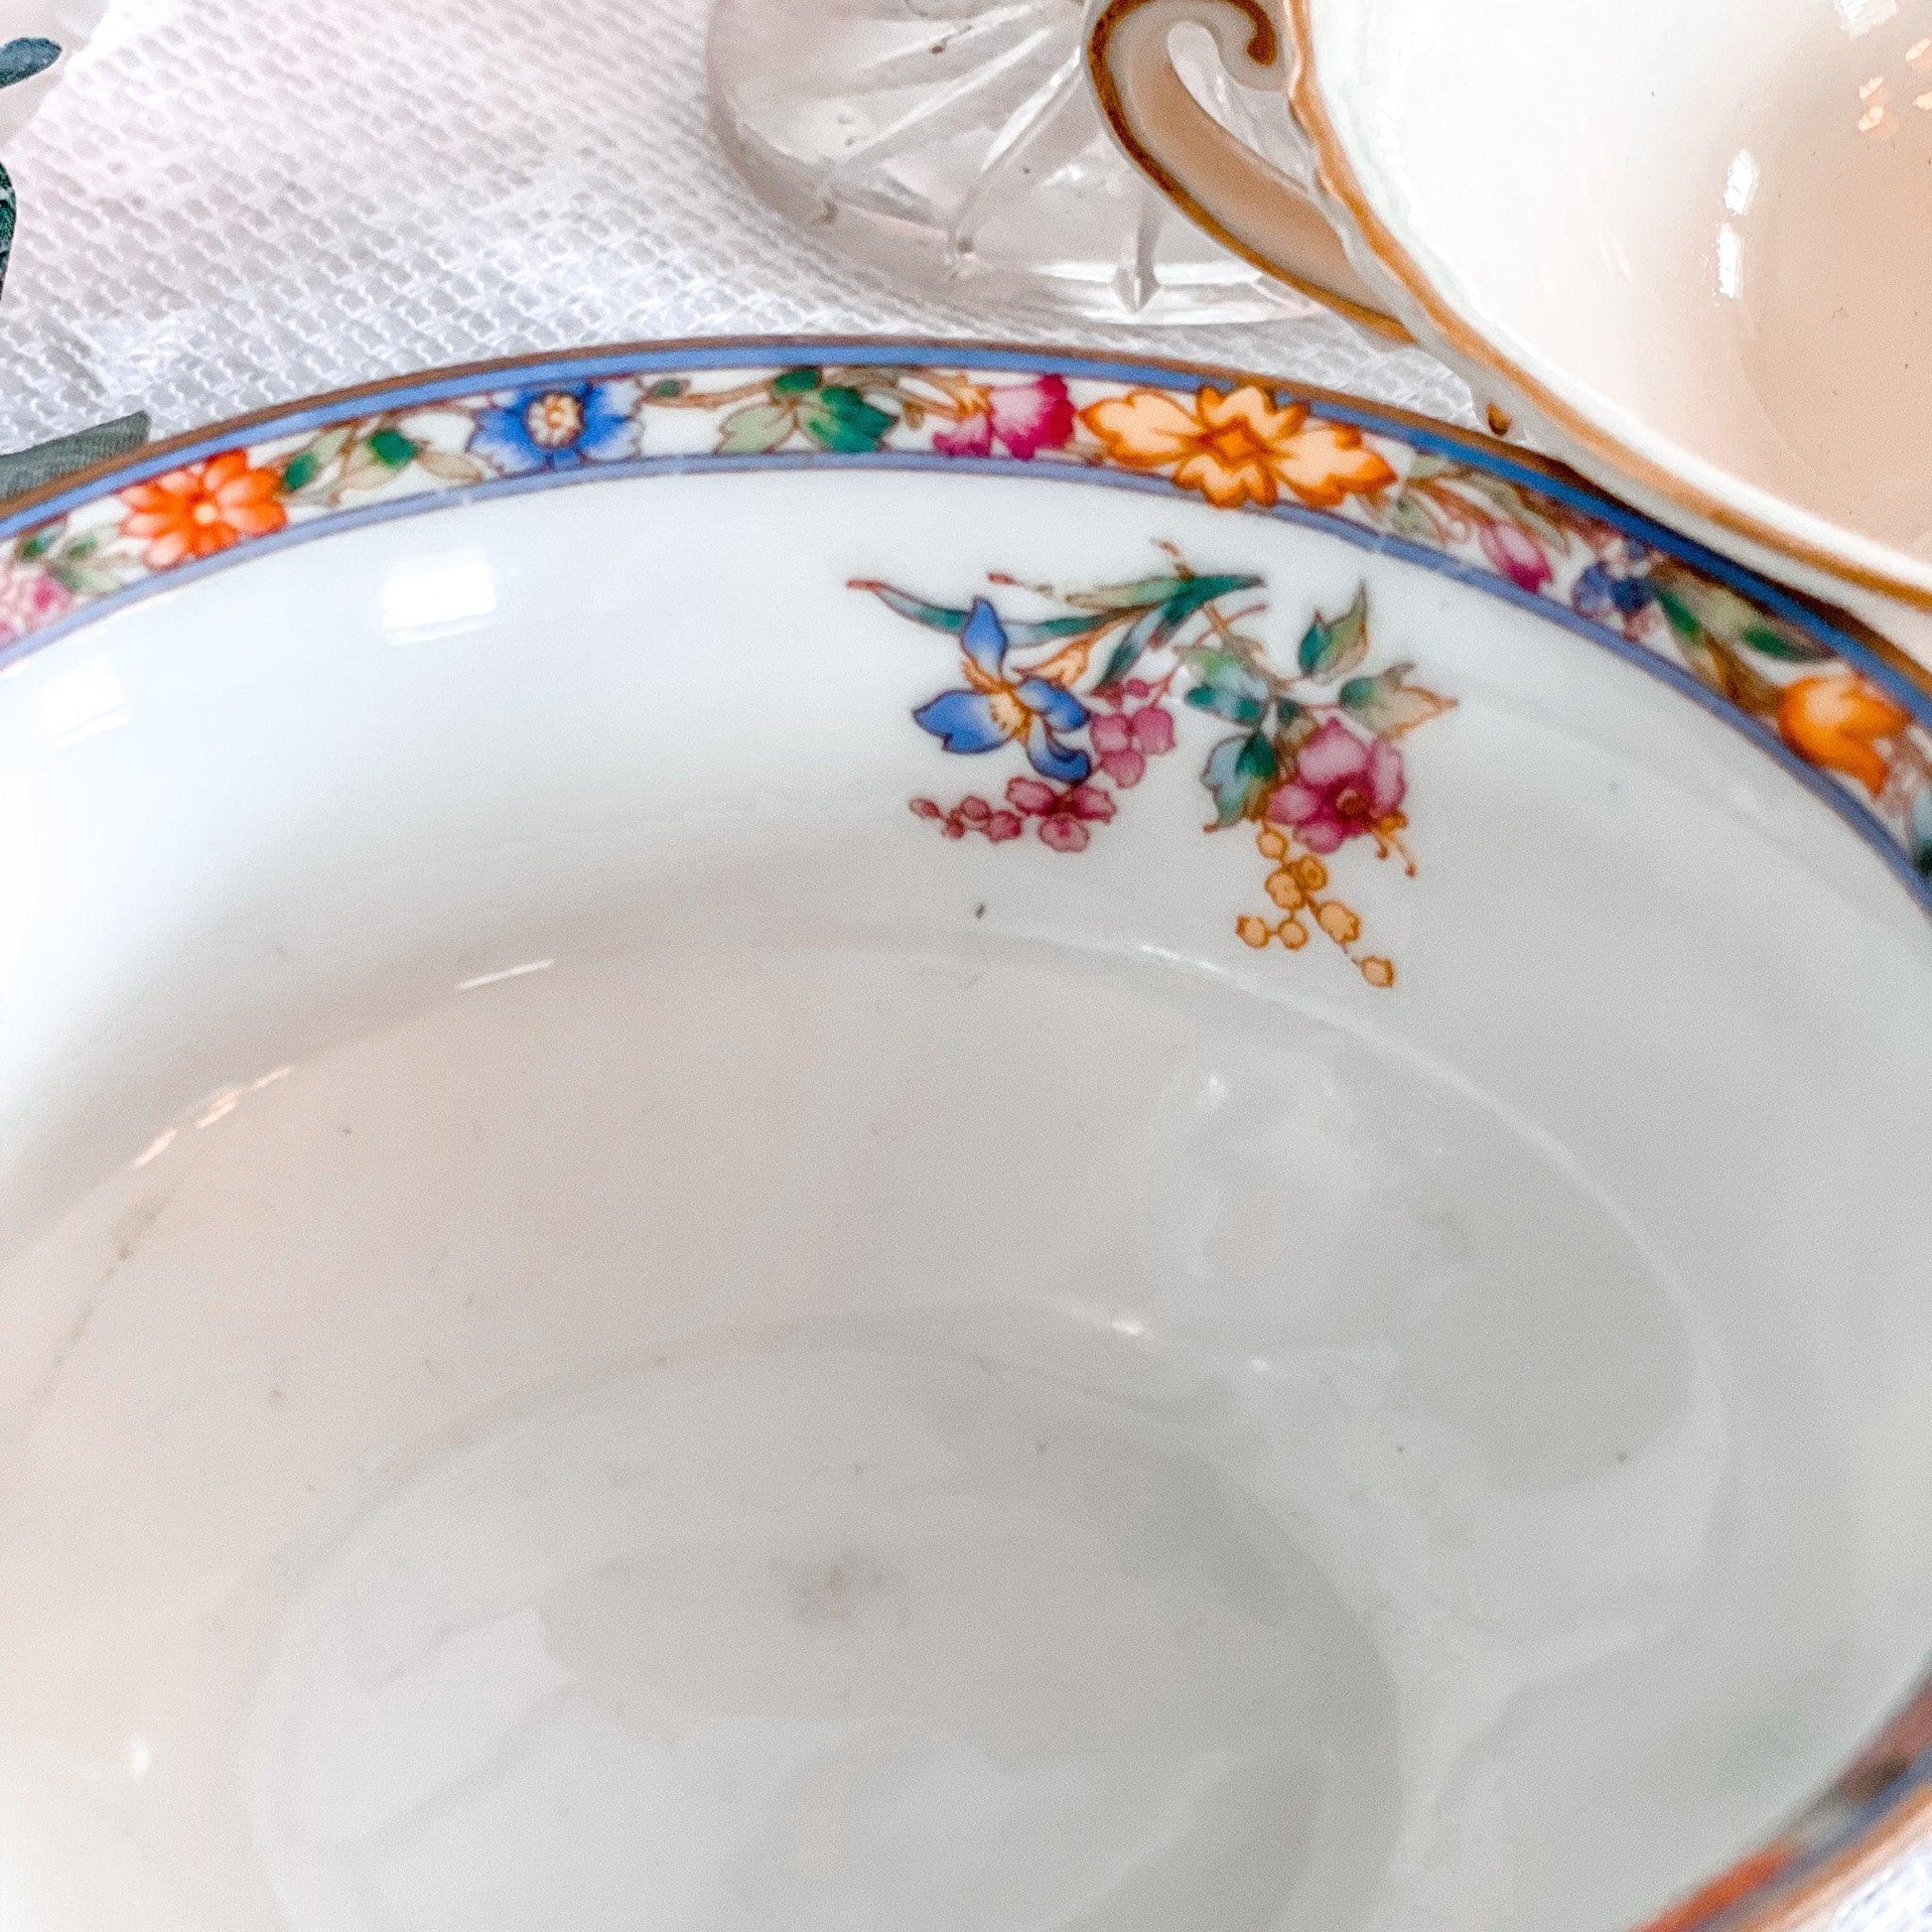 Scented Candles in Mismatched Vintage China Soup Bowls - RetroWix 